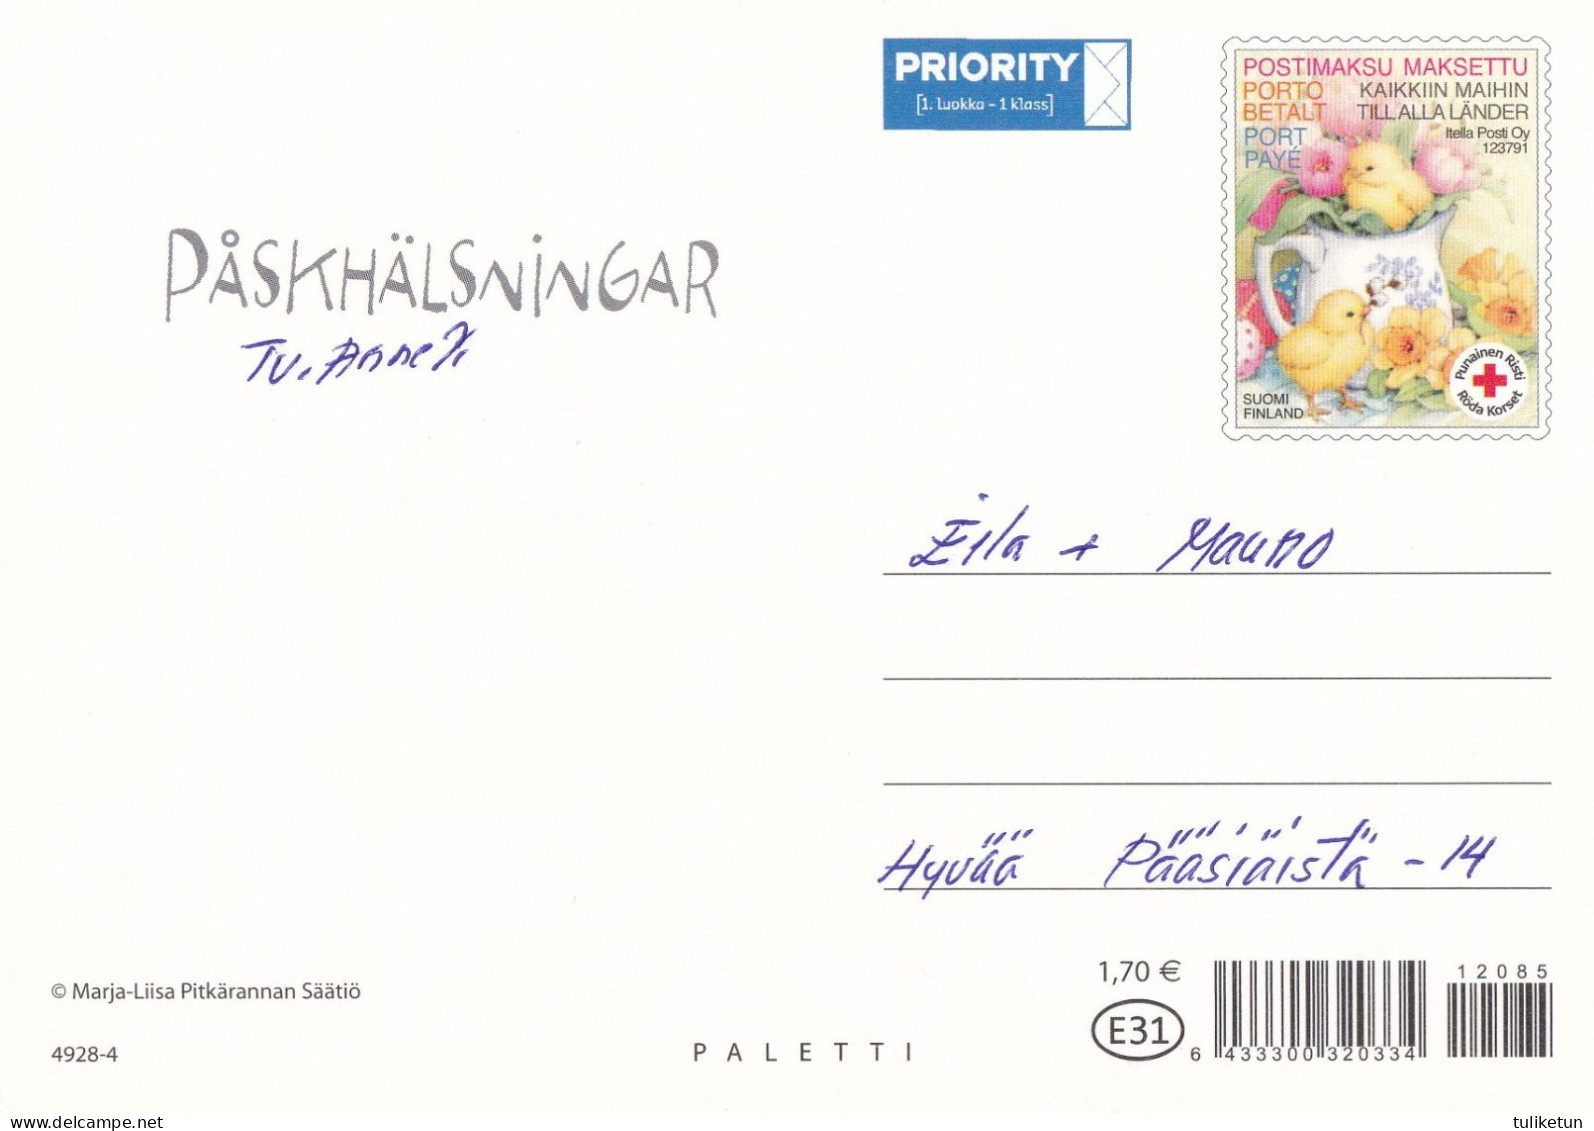 Postal Stationery - Witches Walking - Happy Easter - Red Cross - Suomi Finland - Postage Paid - Pitkäranta - Postal Stationery